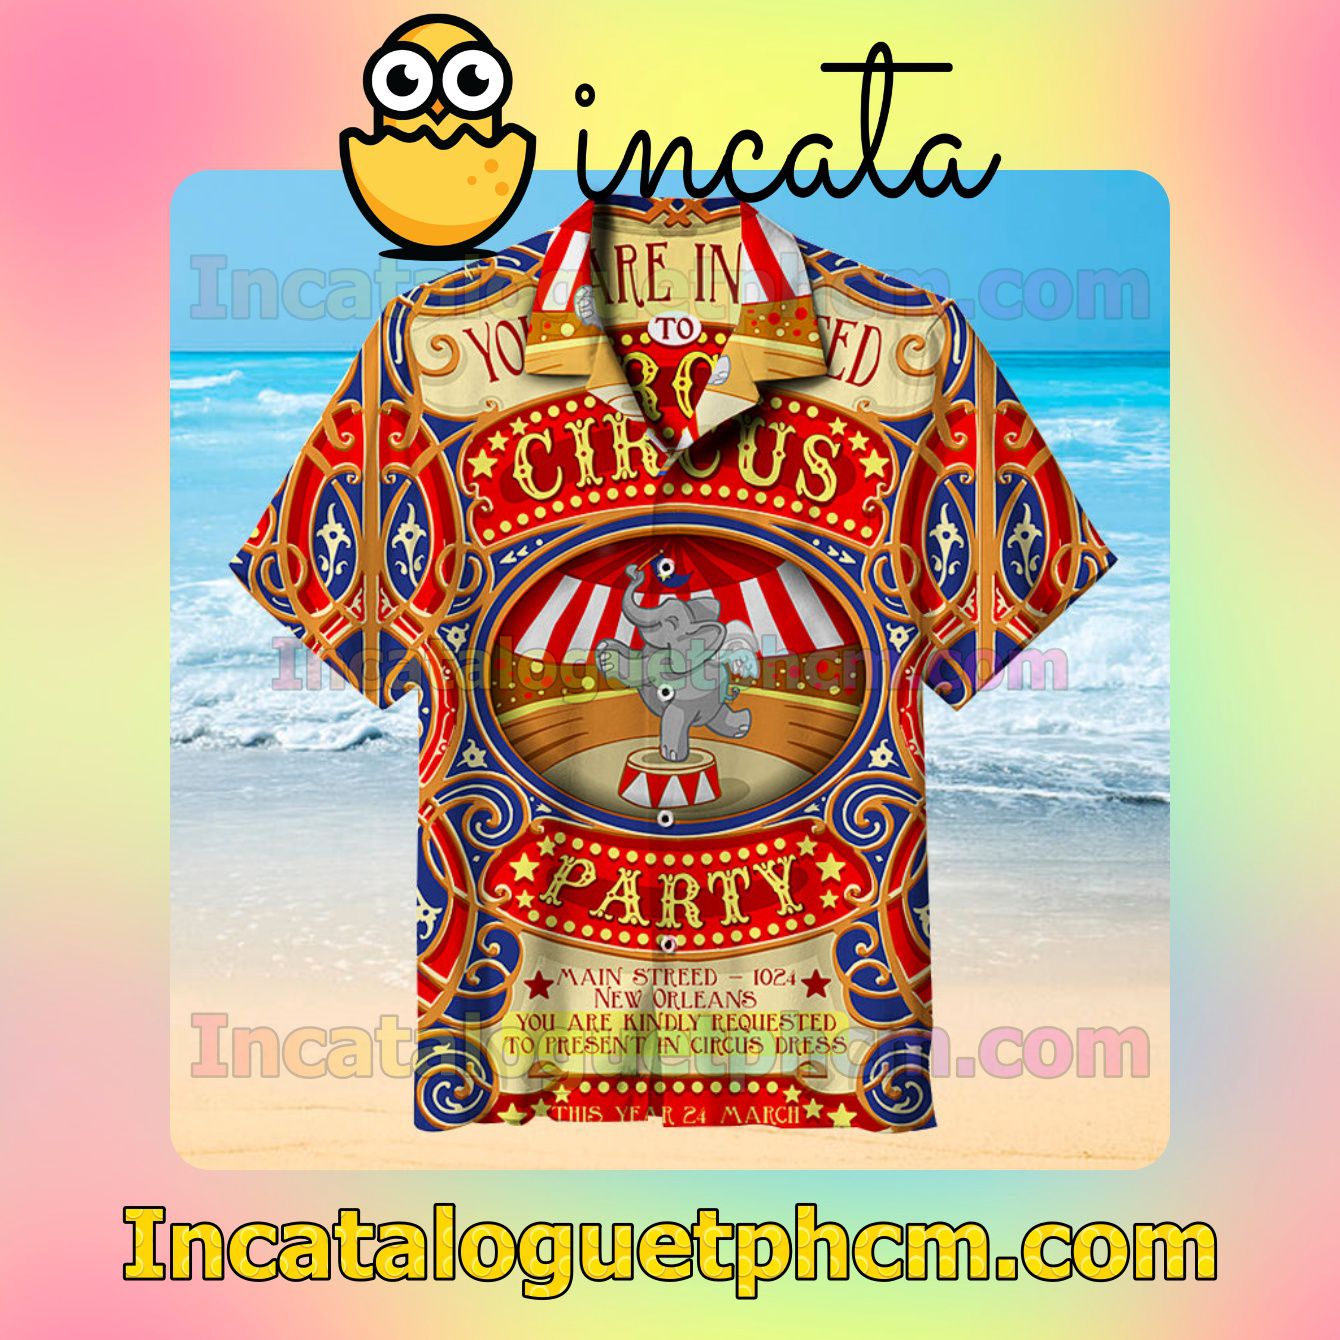 Circus Party With Elephants Button Down Shirts